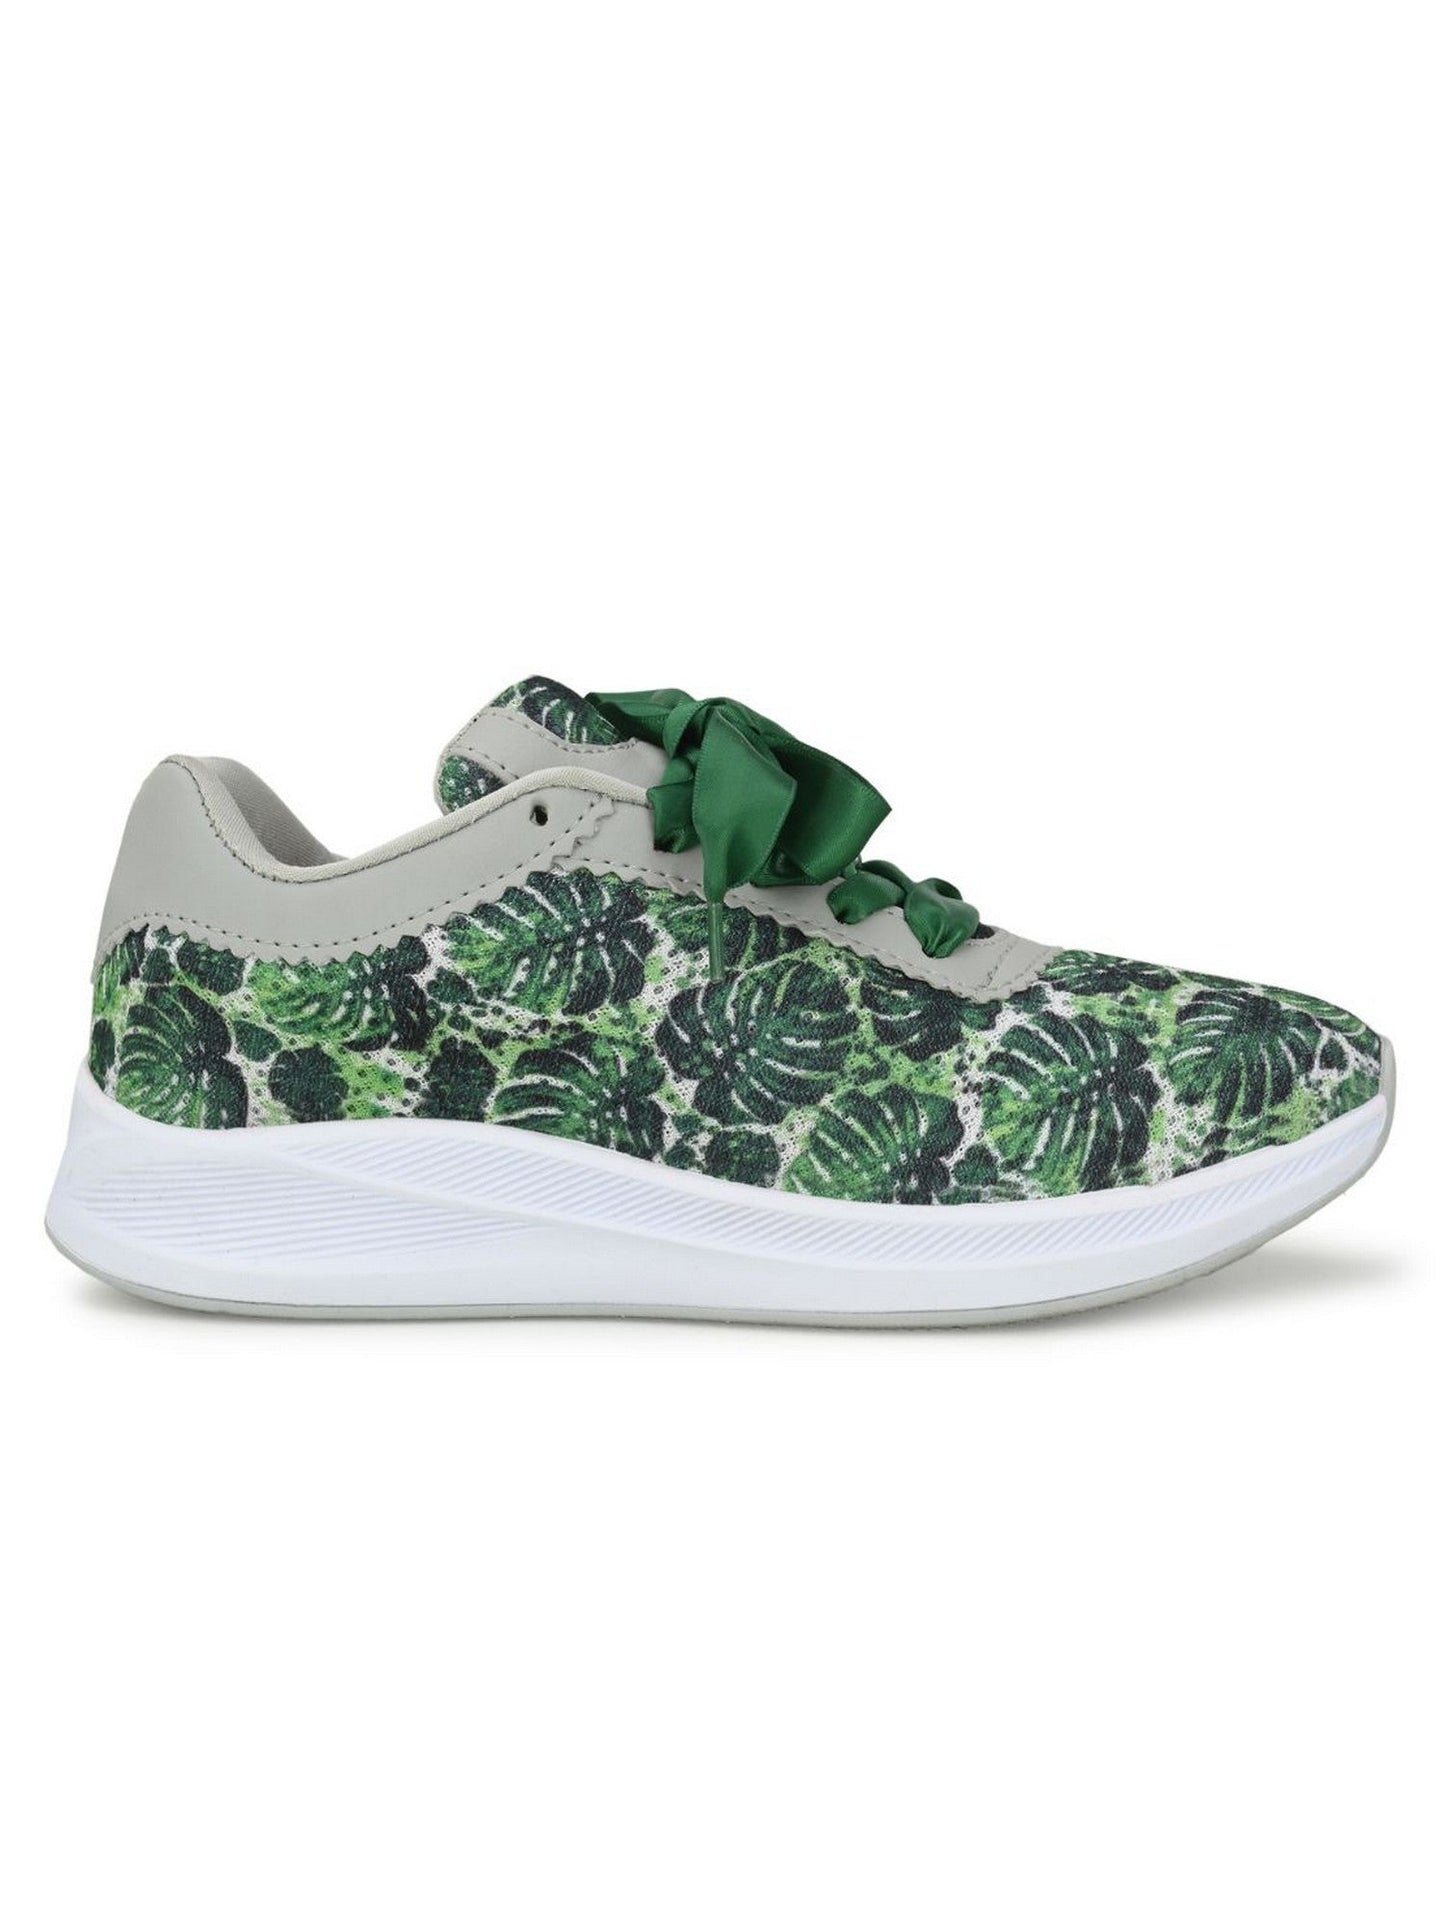 Hirolas® Women Printed Green Mesh Fitness Lace-Up Sports_Shoes (HRLWF13GRN)